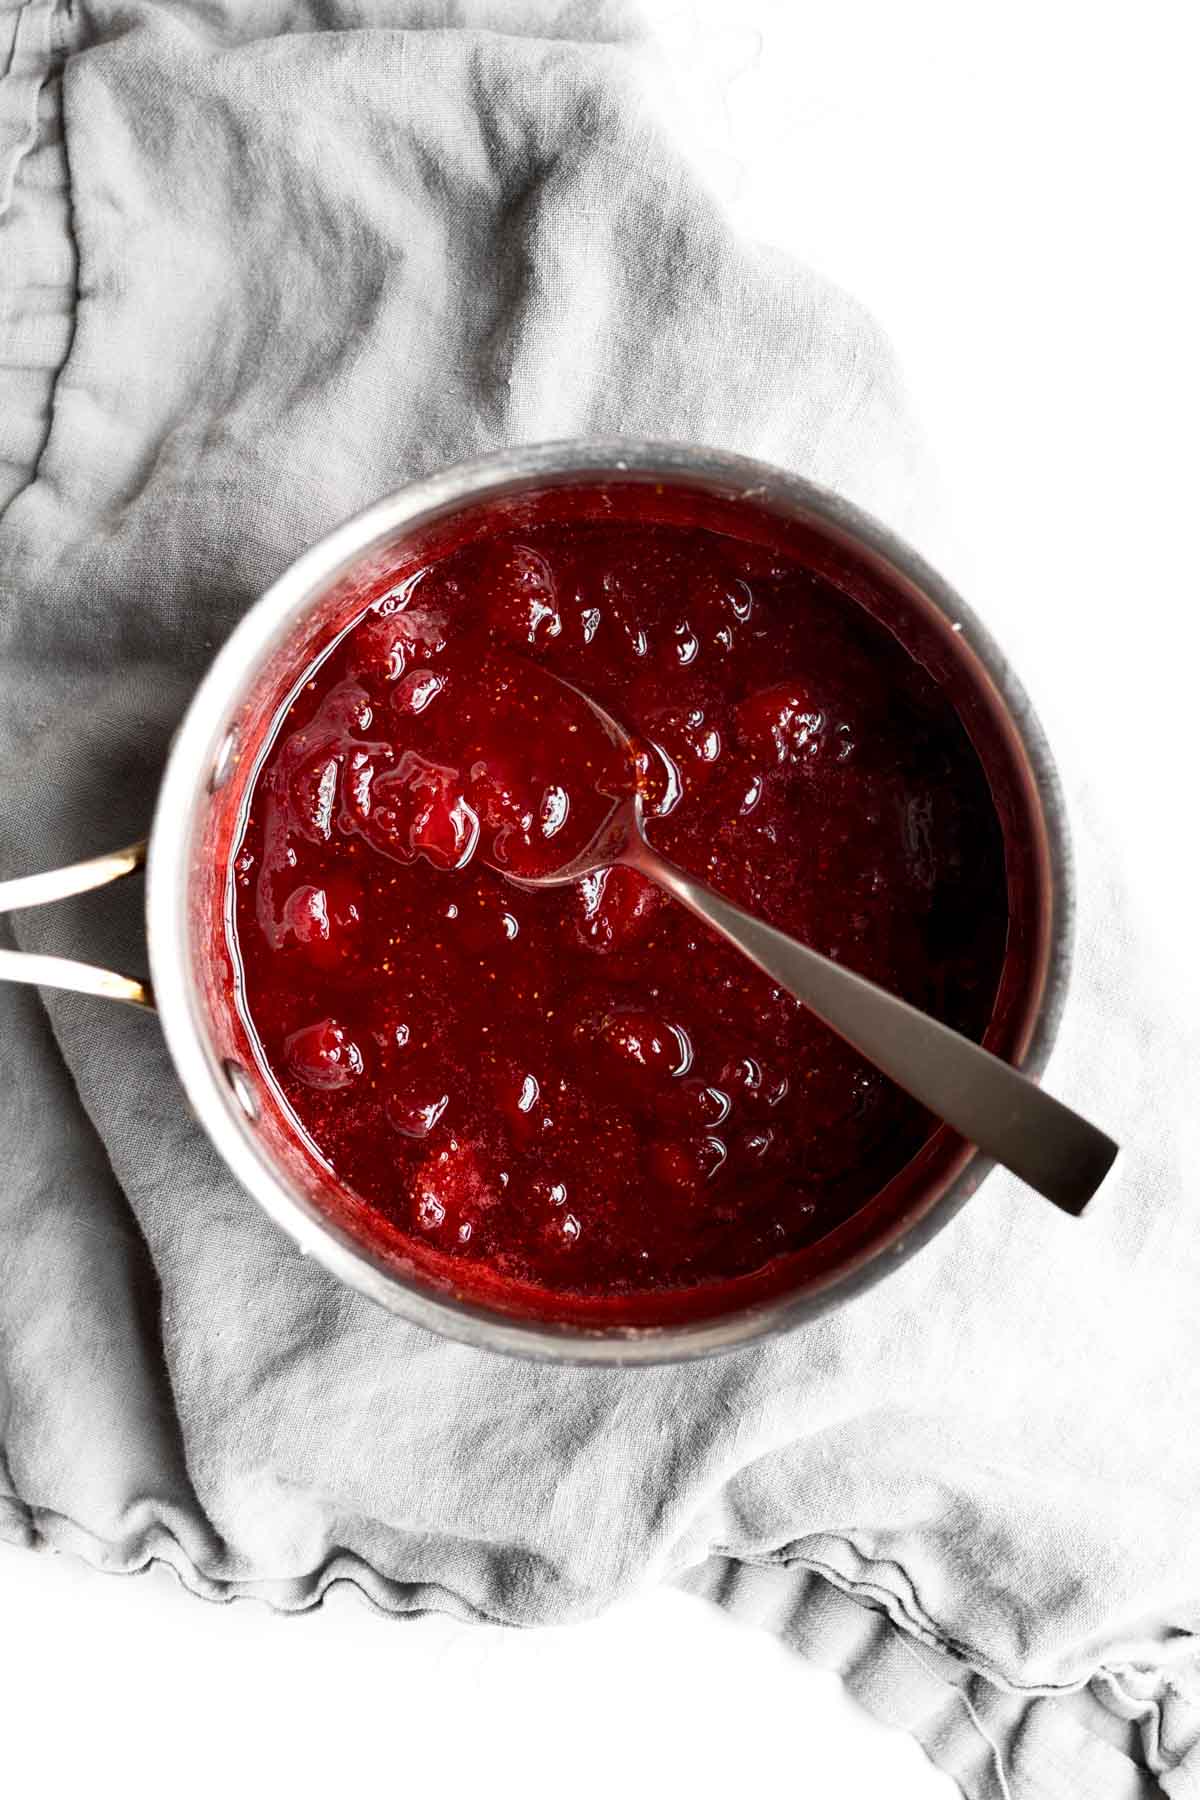 Bright red strawberry sauce cooked perfectly.